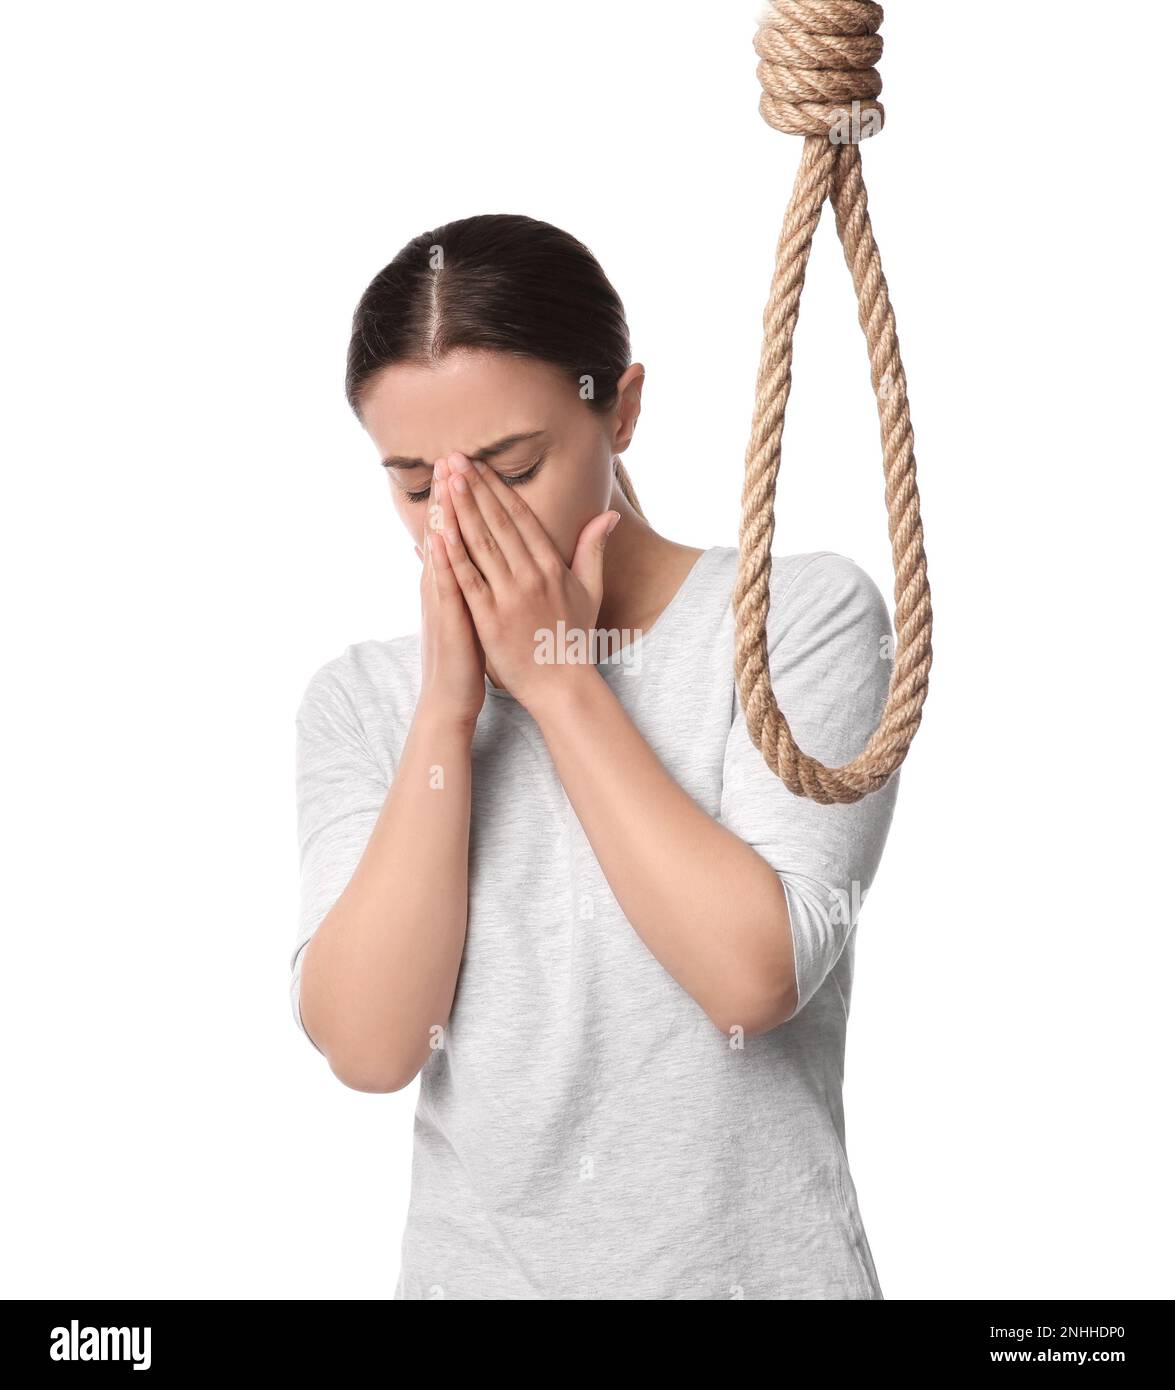 Depressed woman with rope noose on white background Stock Photo